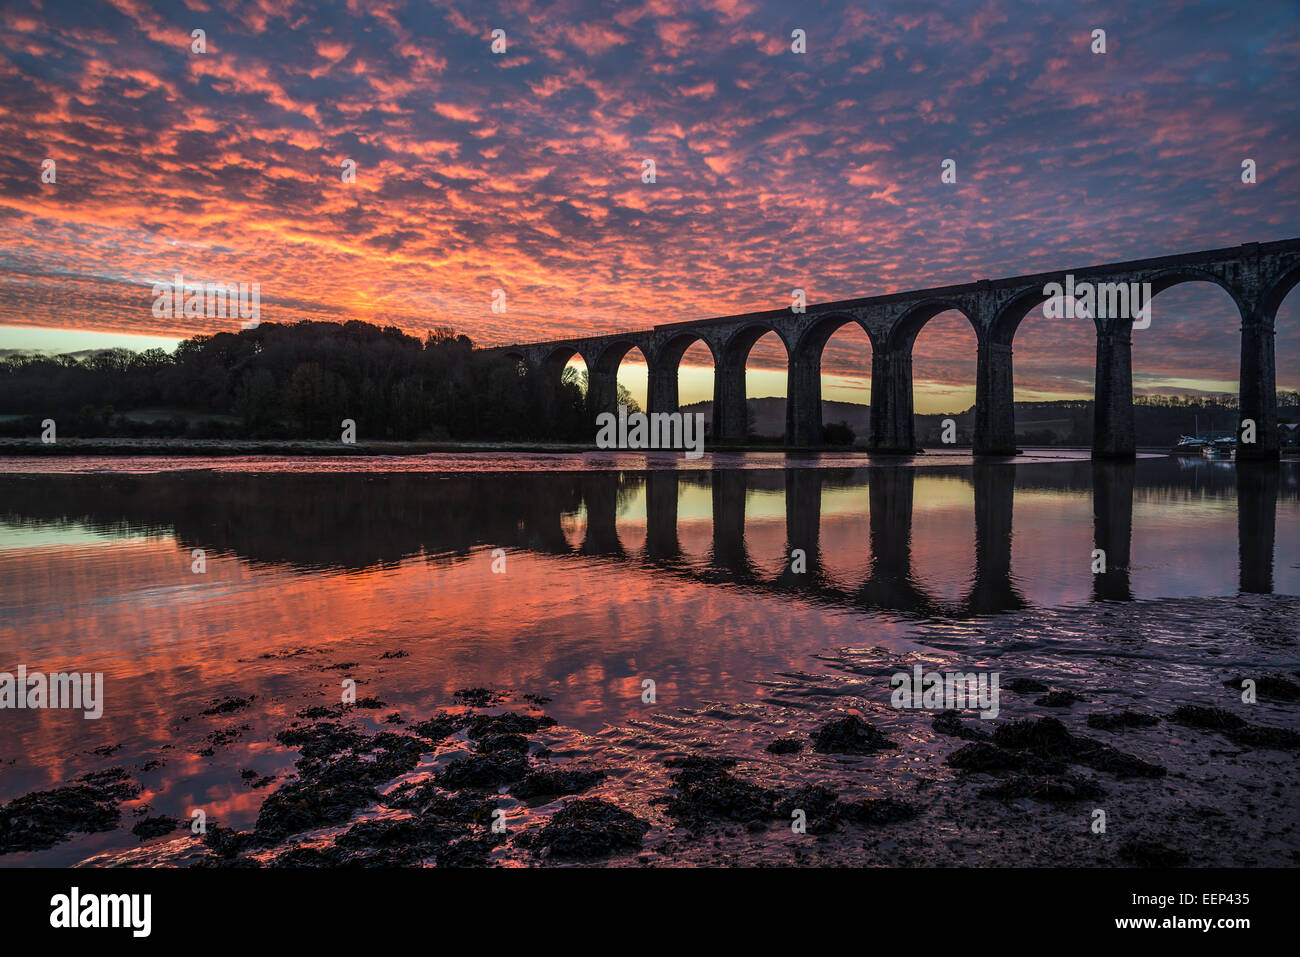 Sunrise on the river lynher with beautiful sky and the viaduct with reflections at st germans, cornwall, uk Stock Photo